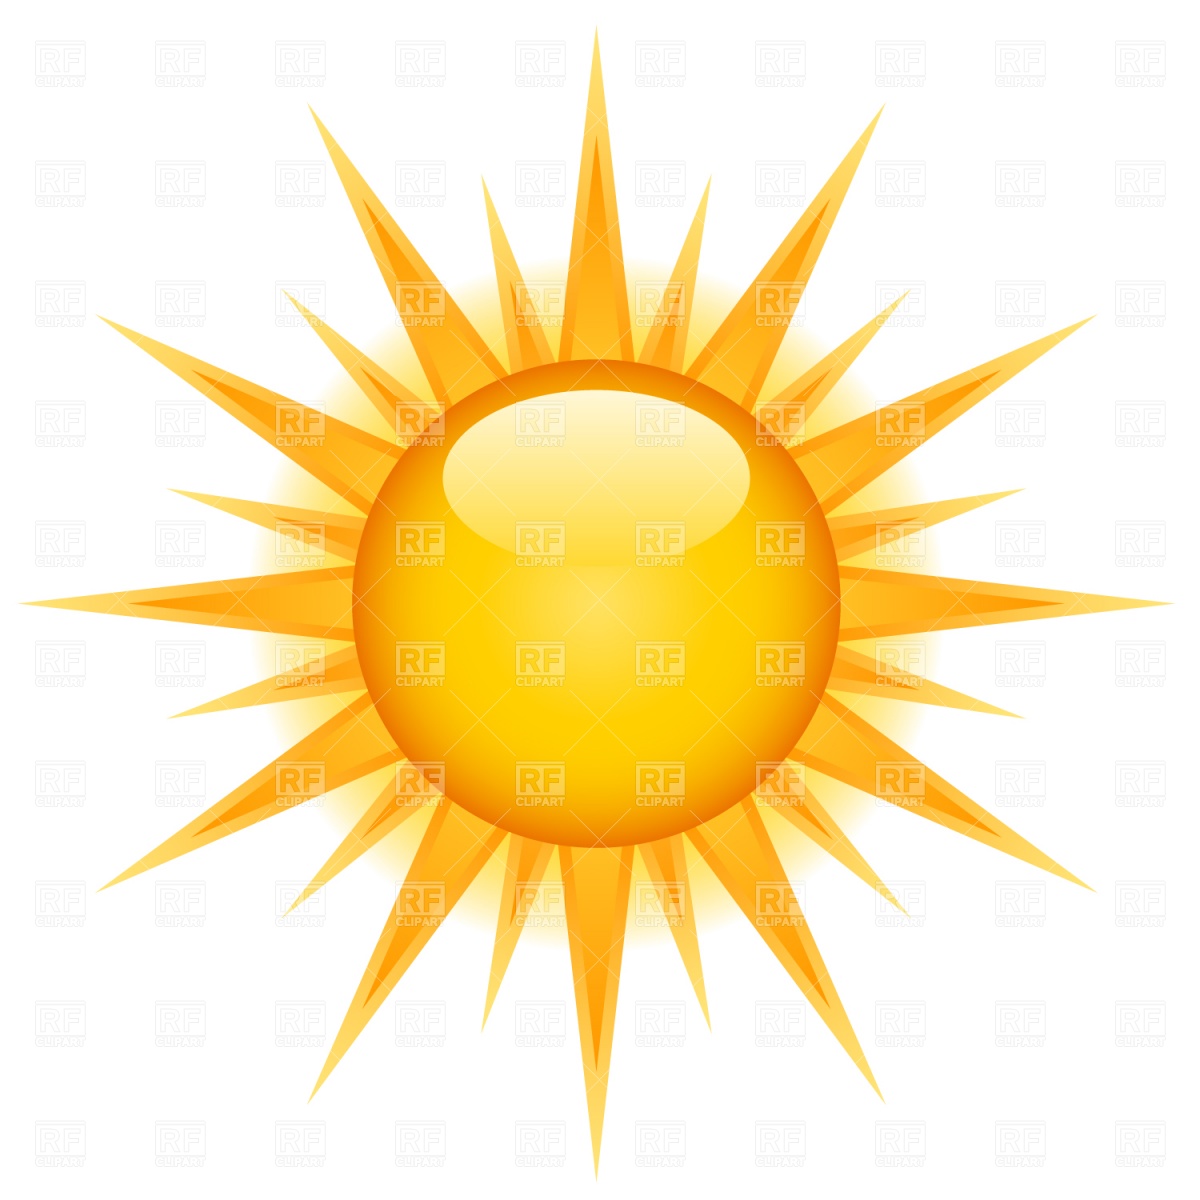 Glossy Sun Icon 1526 Download Royalty Free Vector Clipart  Eps